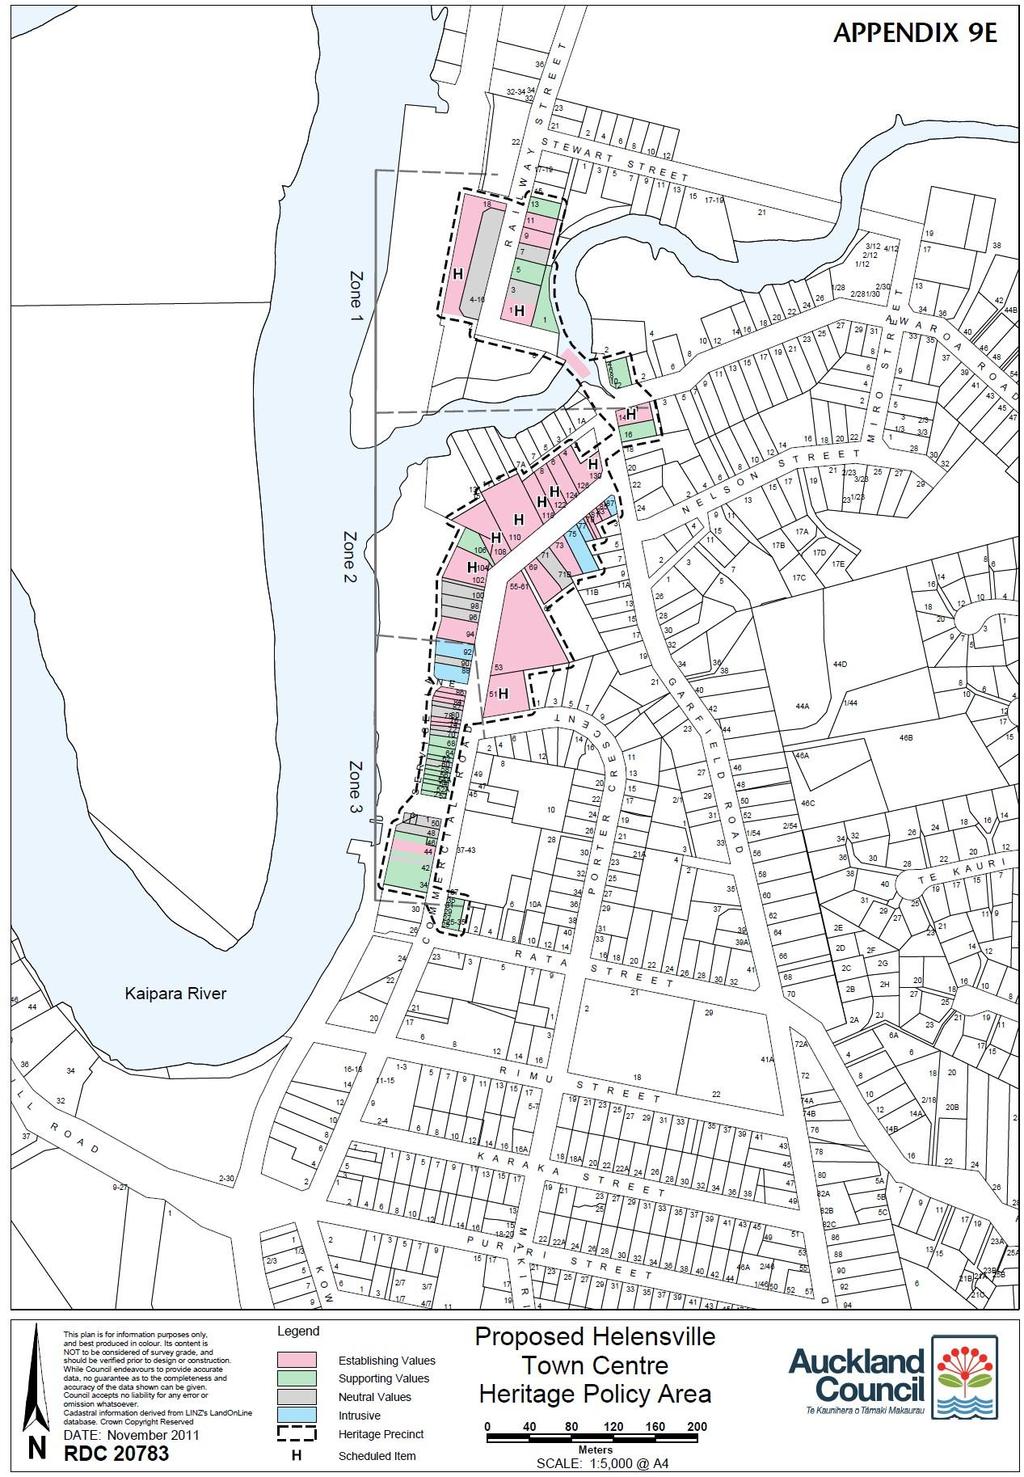 HELENSVILLE TOWN CENTRE HERITAGE POLICY AREA APPENDIX 9E Auckland